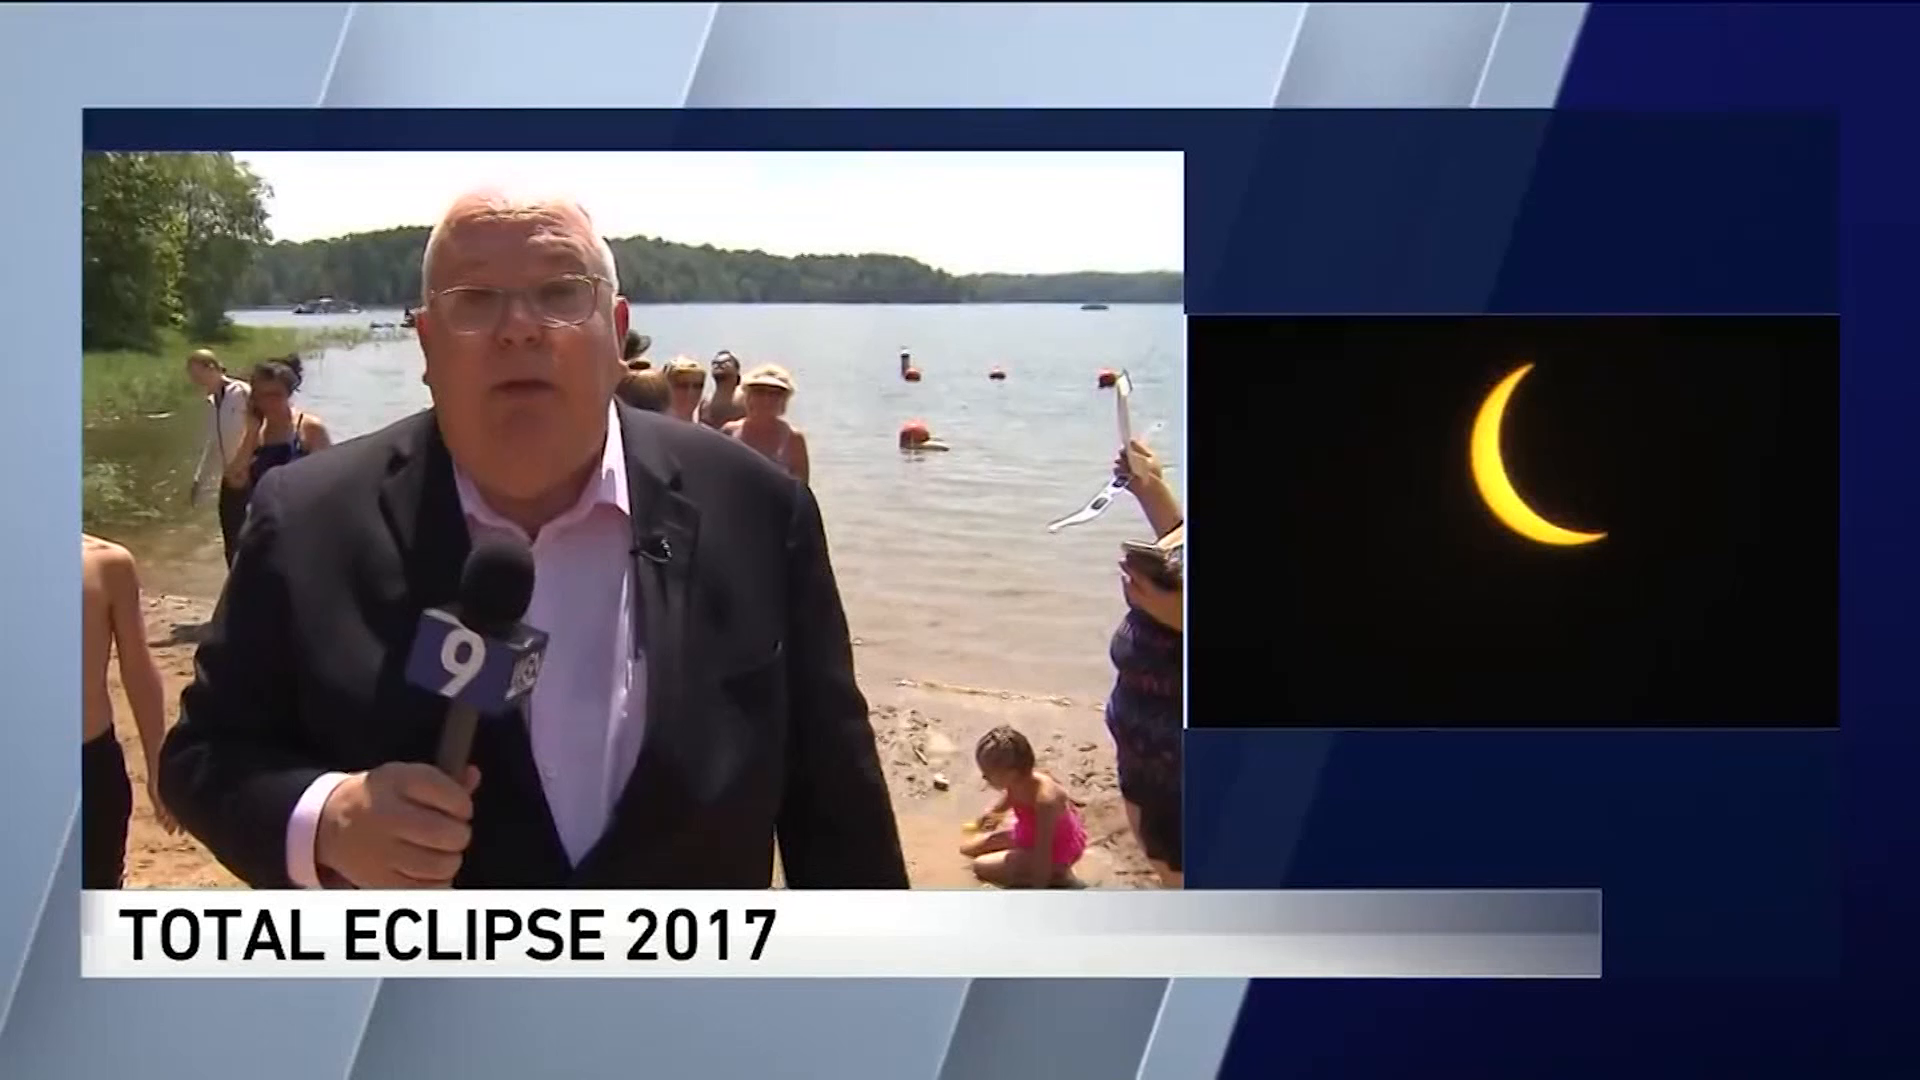 Meteorologist overwhelmed with emotion during eclipse